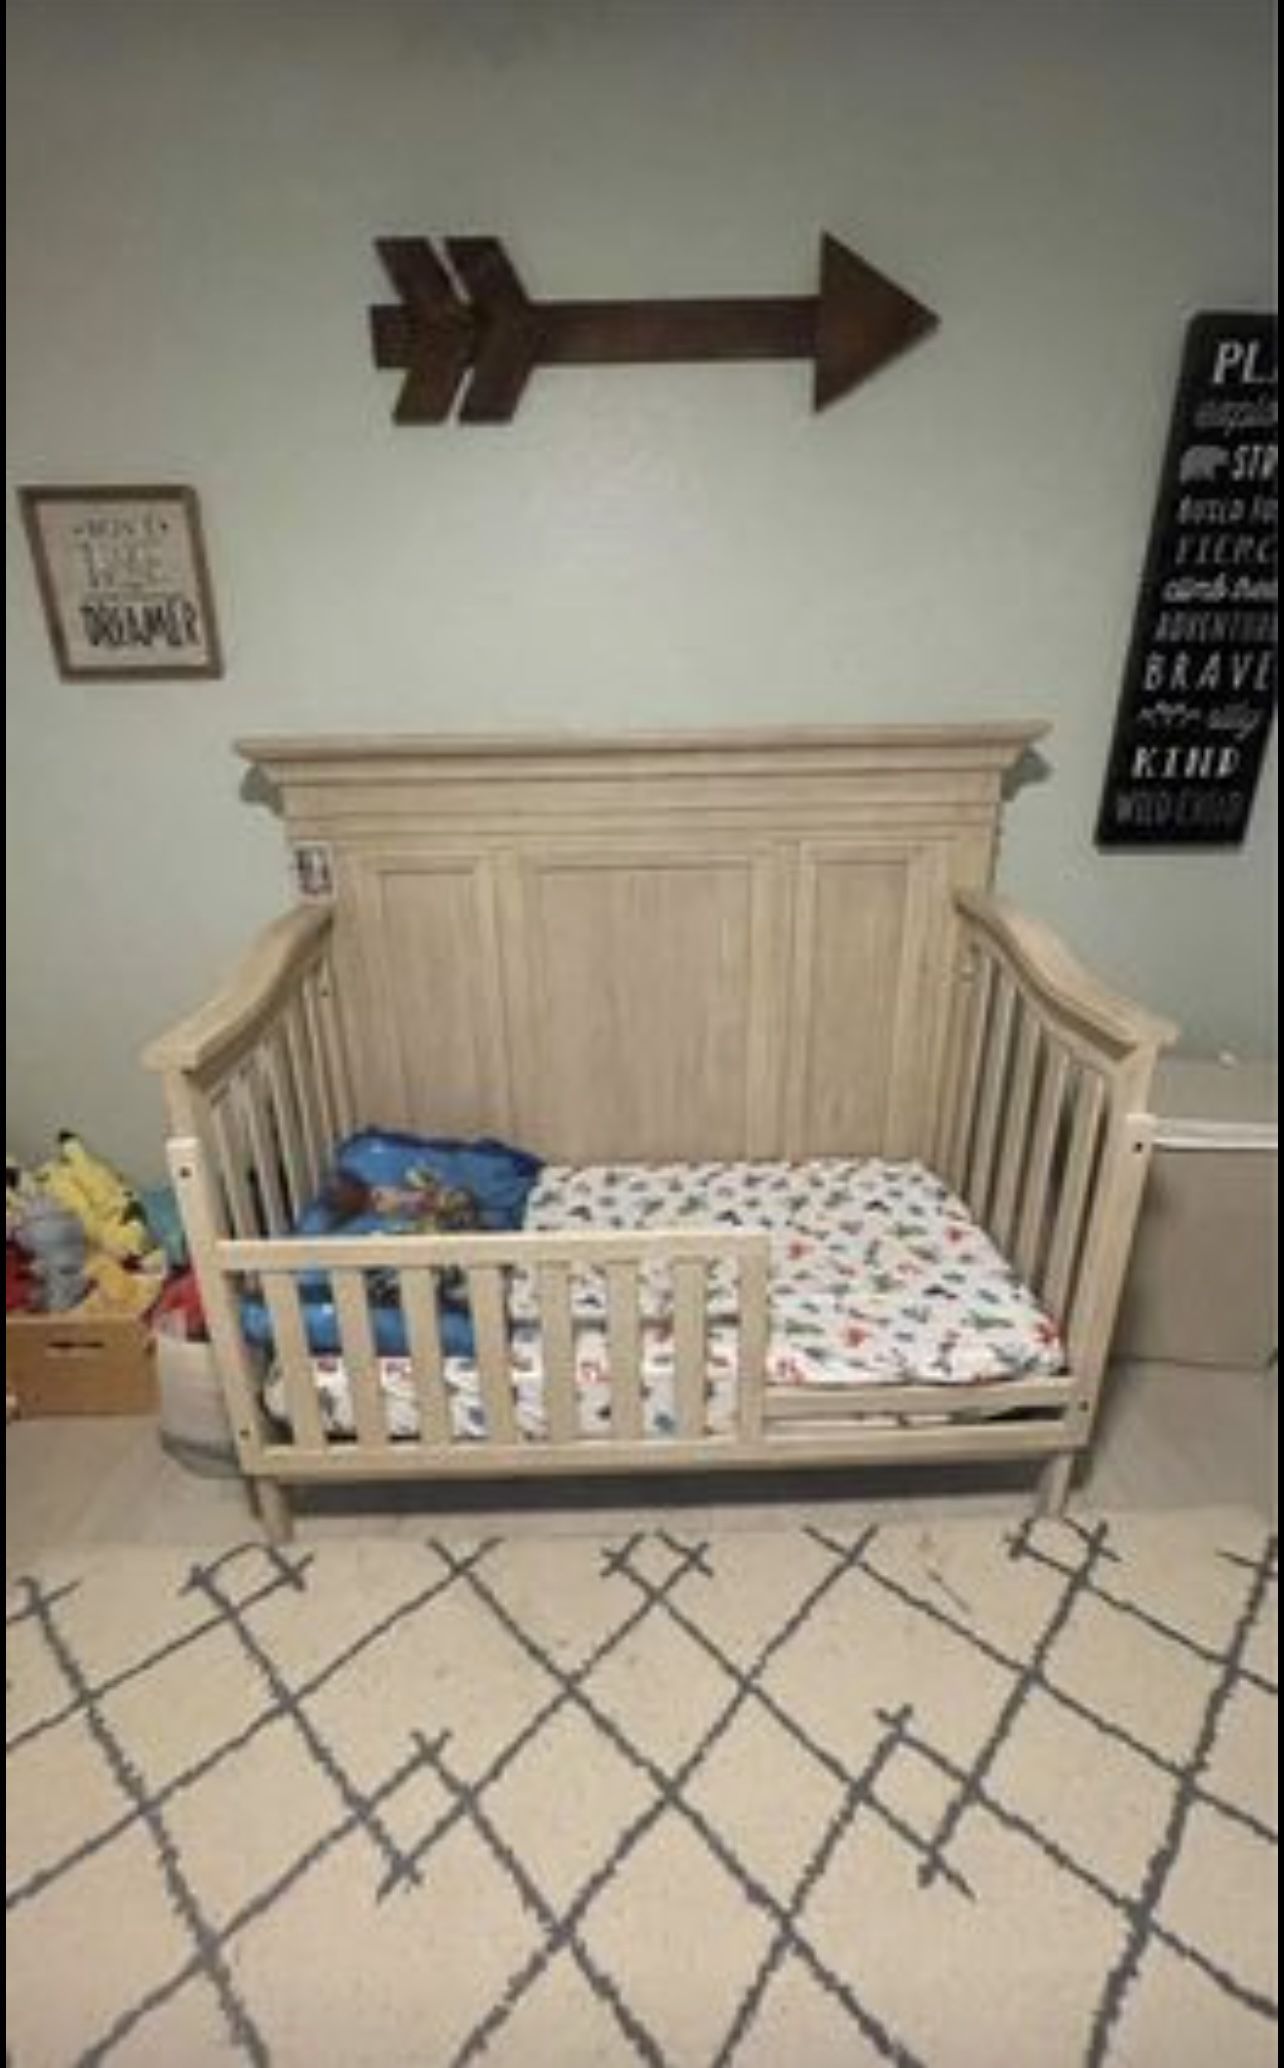 Oxford baby 4 in 1 convertible crib + changing table topper + toddler mattress